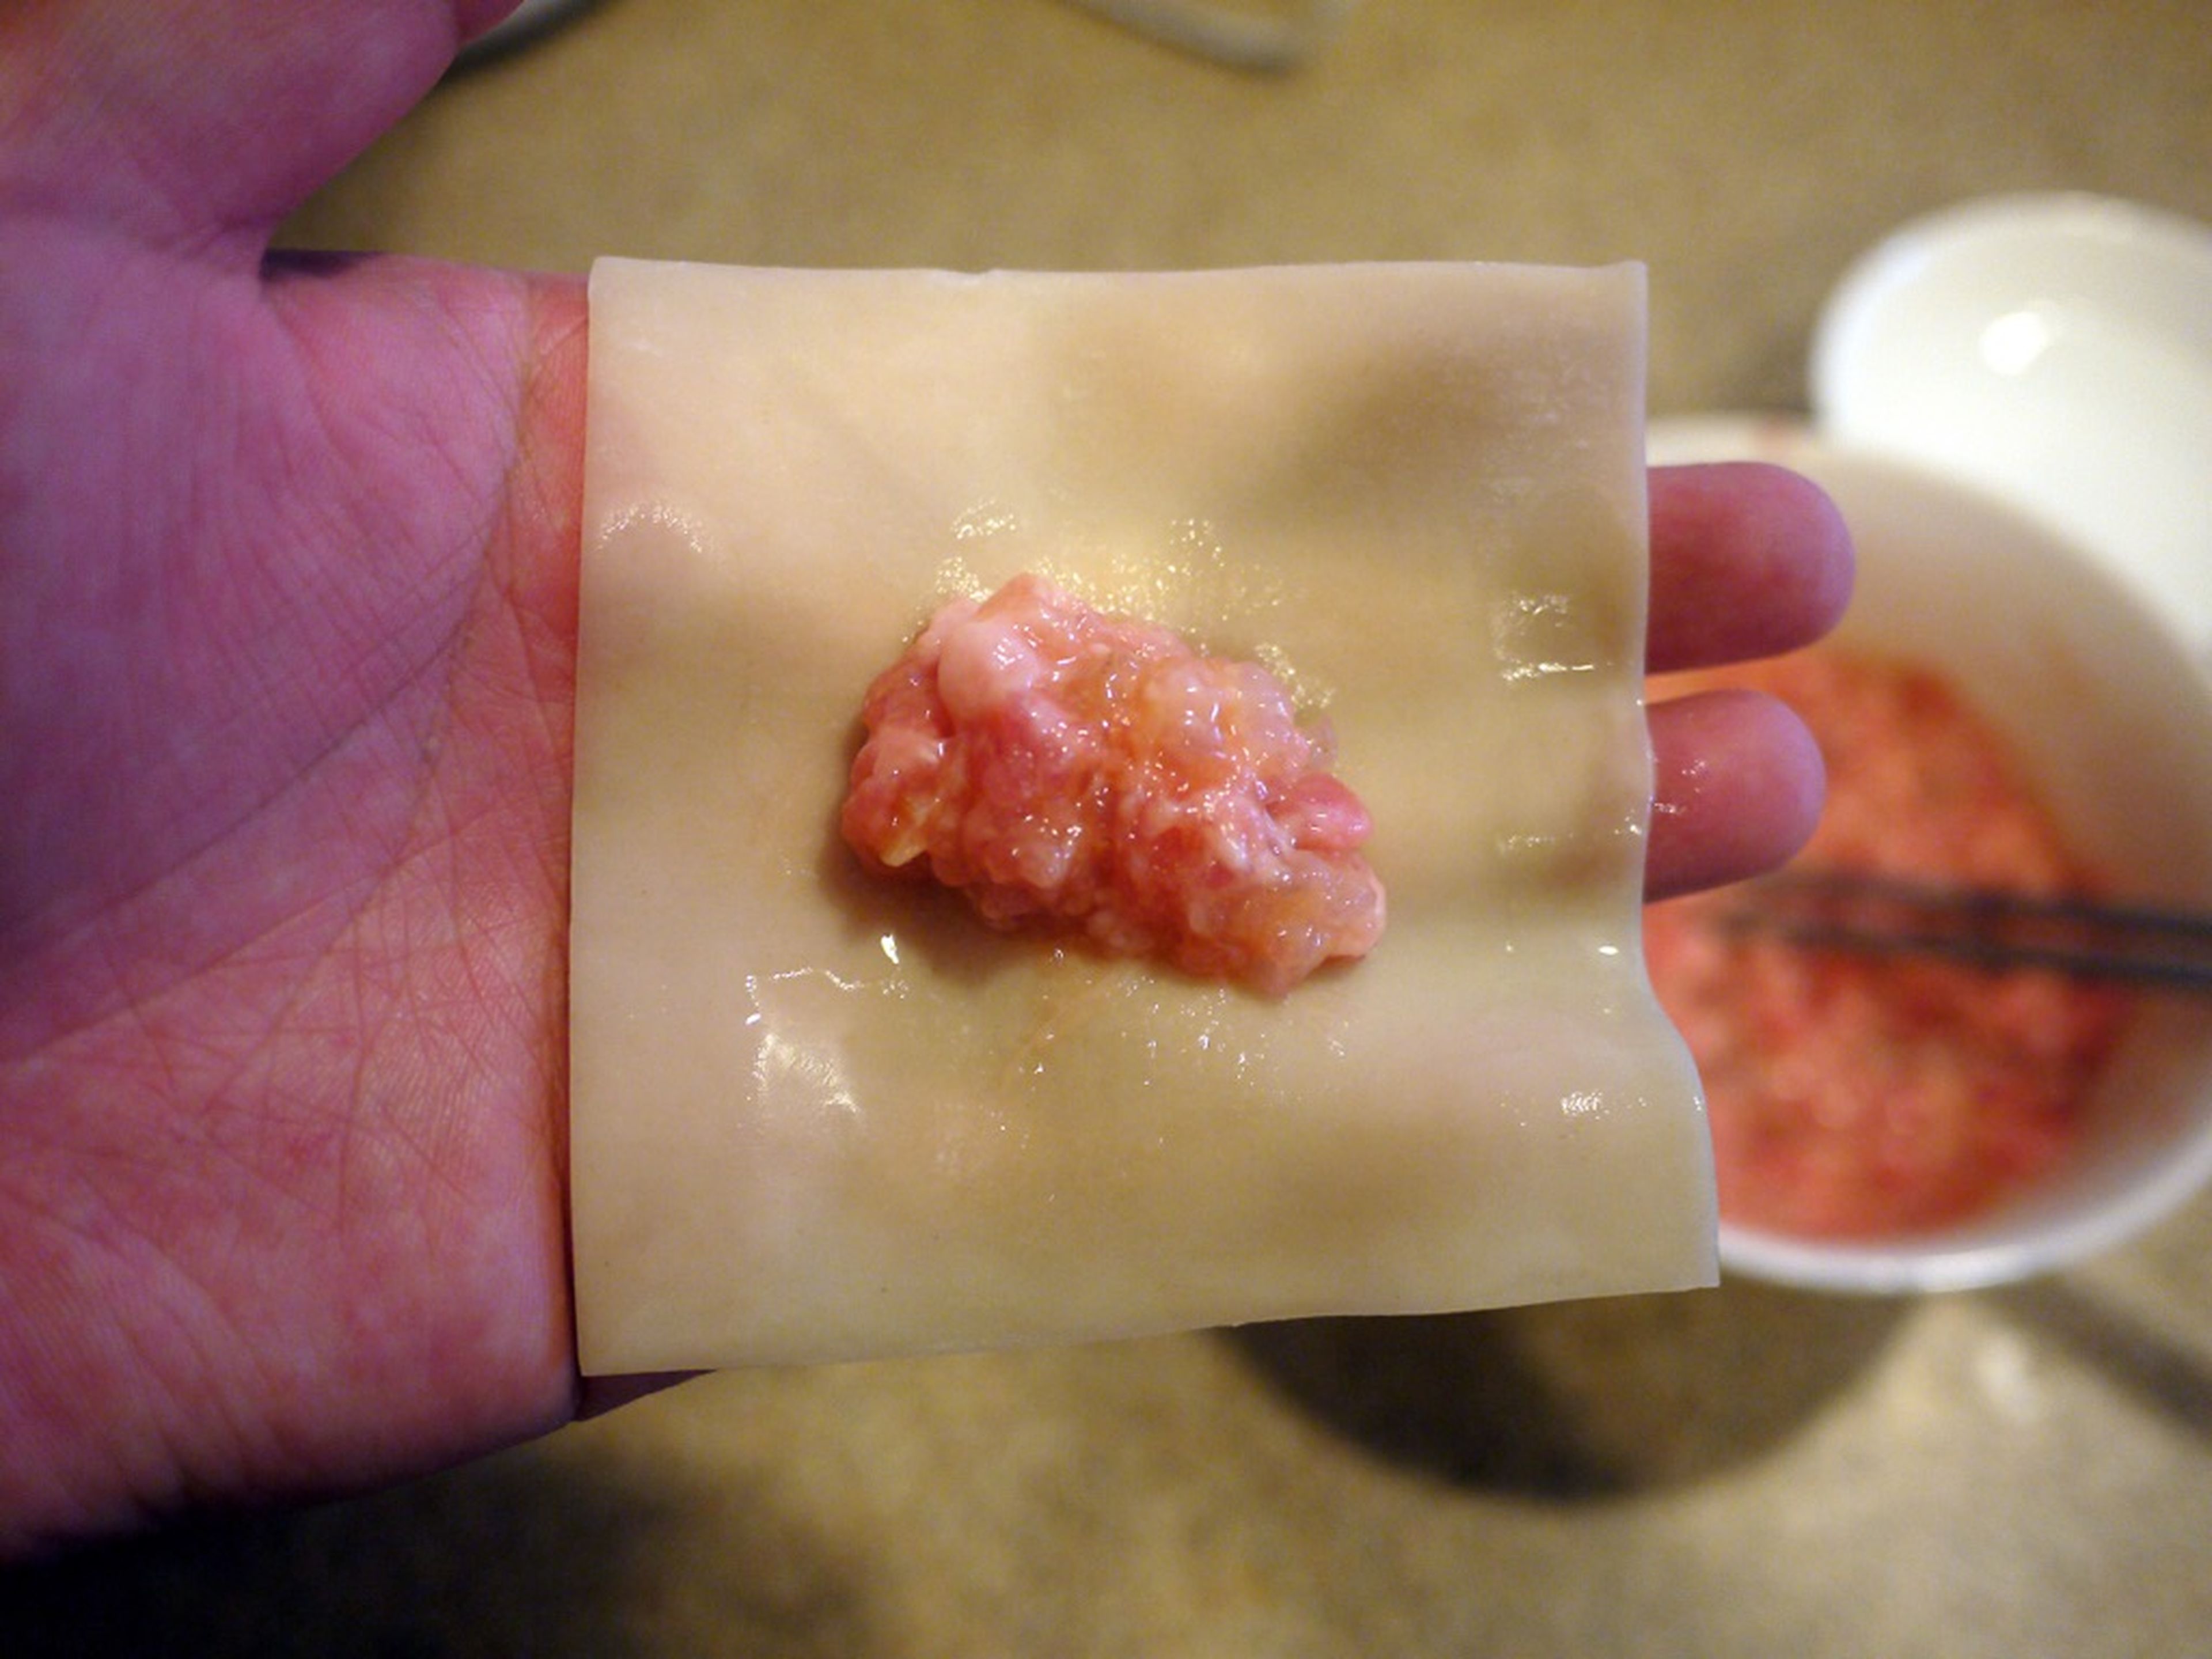 Put a dumpling wrapper on your dry hand. Add 1 teaspoon of the stuffing in the center. Wet the left, right and bottom sides of the wrapper with some water.